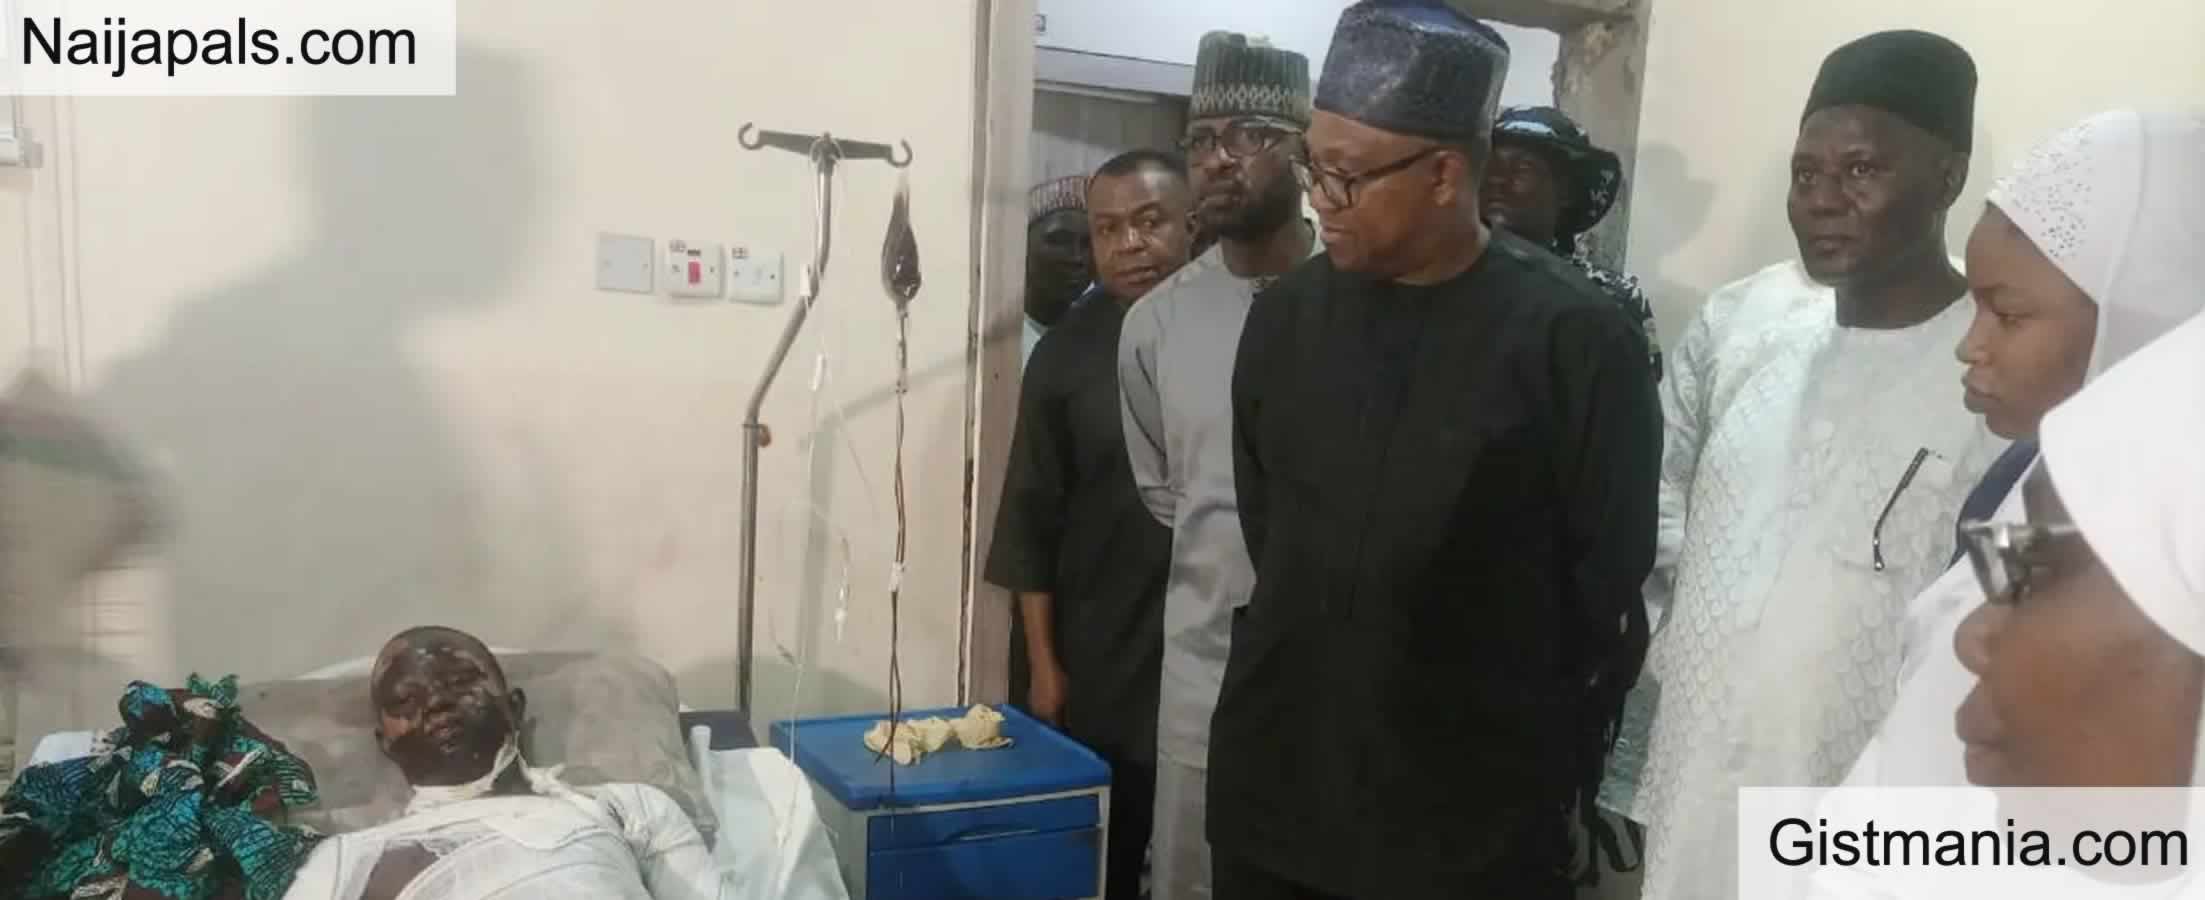 Peter Obi Visits Victims Of Kano Mosque Attack- <em>By Gistmania Naijapals</em>